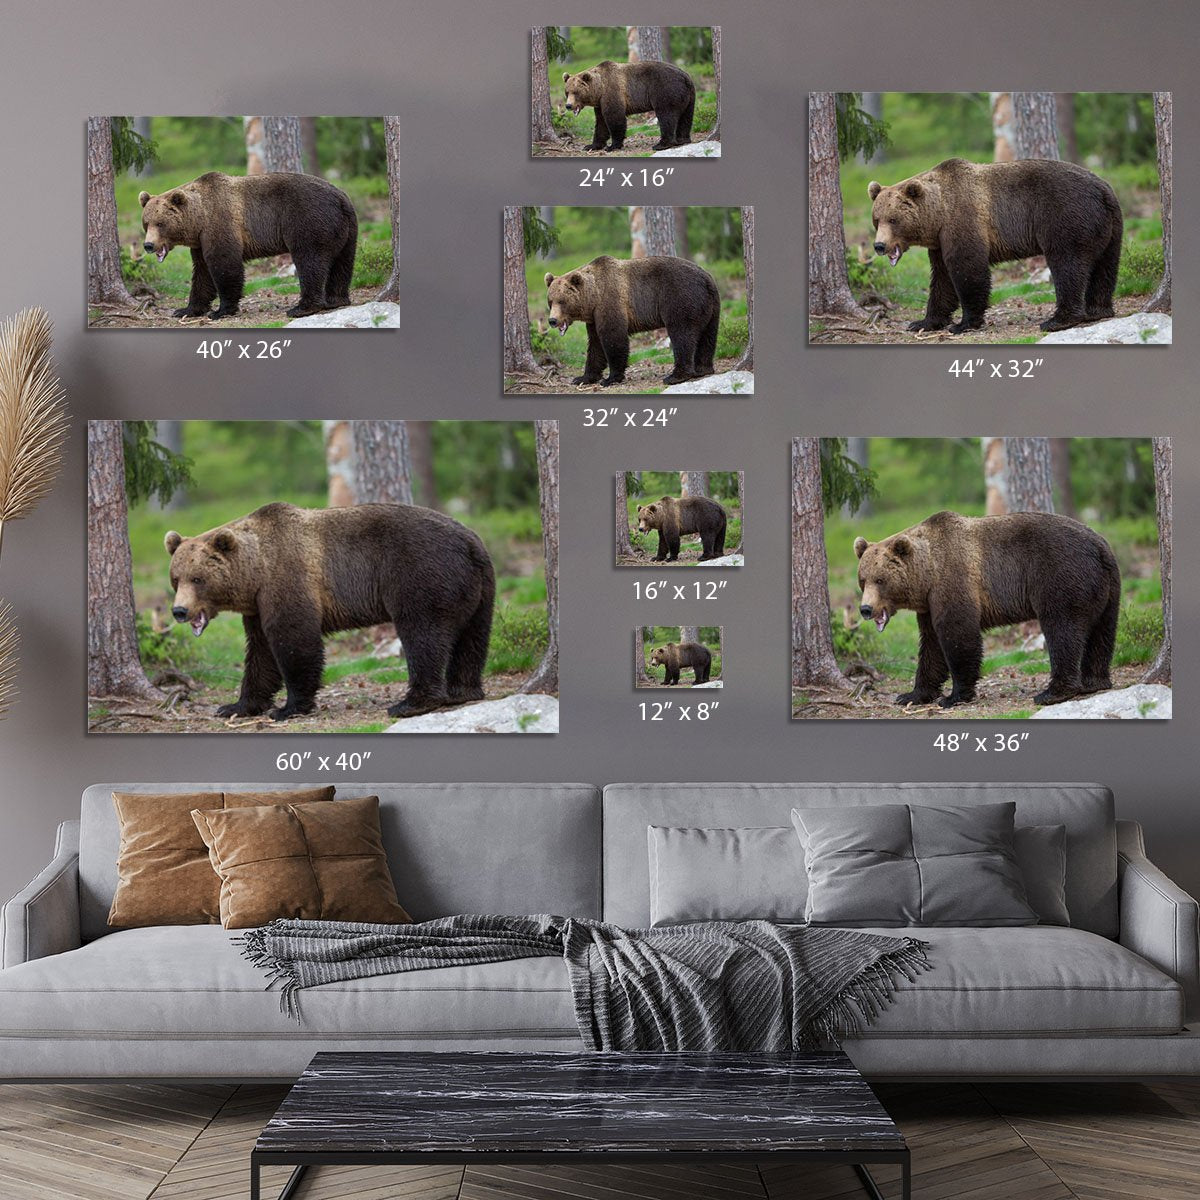 Brown bear in Tiaga forest Canvas Print or Poster